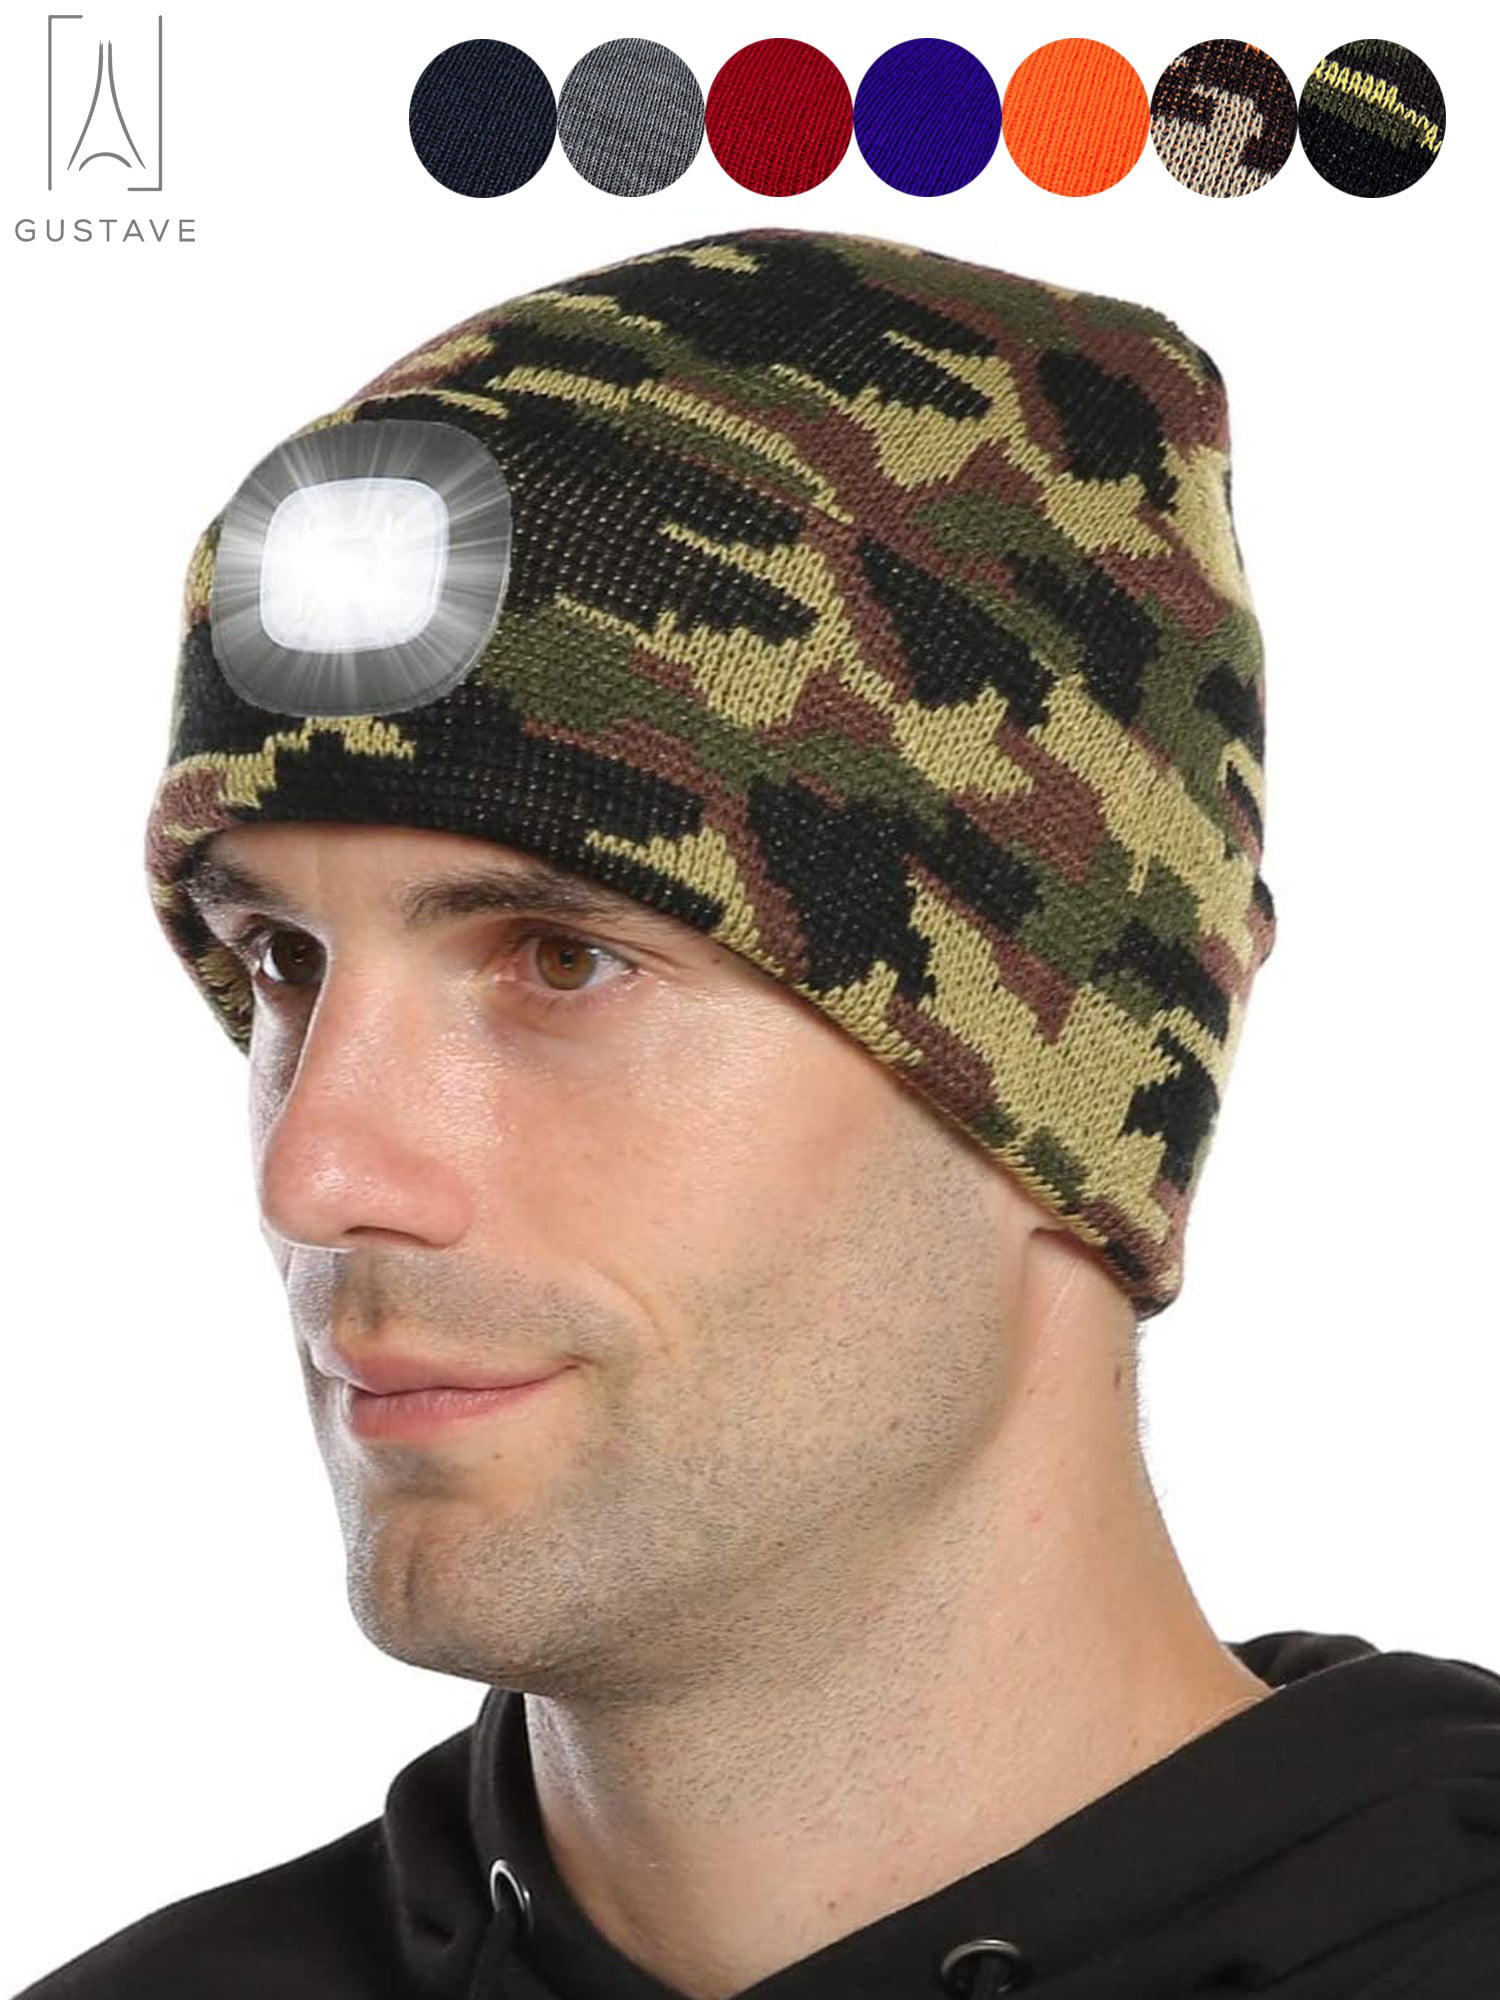 Folewr-8 LED Lighted Beanie Cap Unisex Knitted Running Hat for Skiing Hiking Camping Cycling 